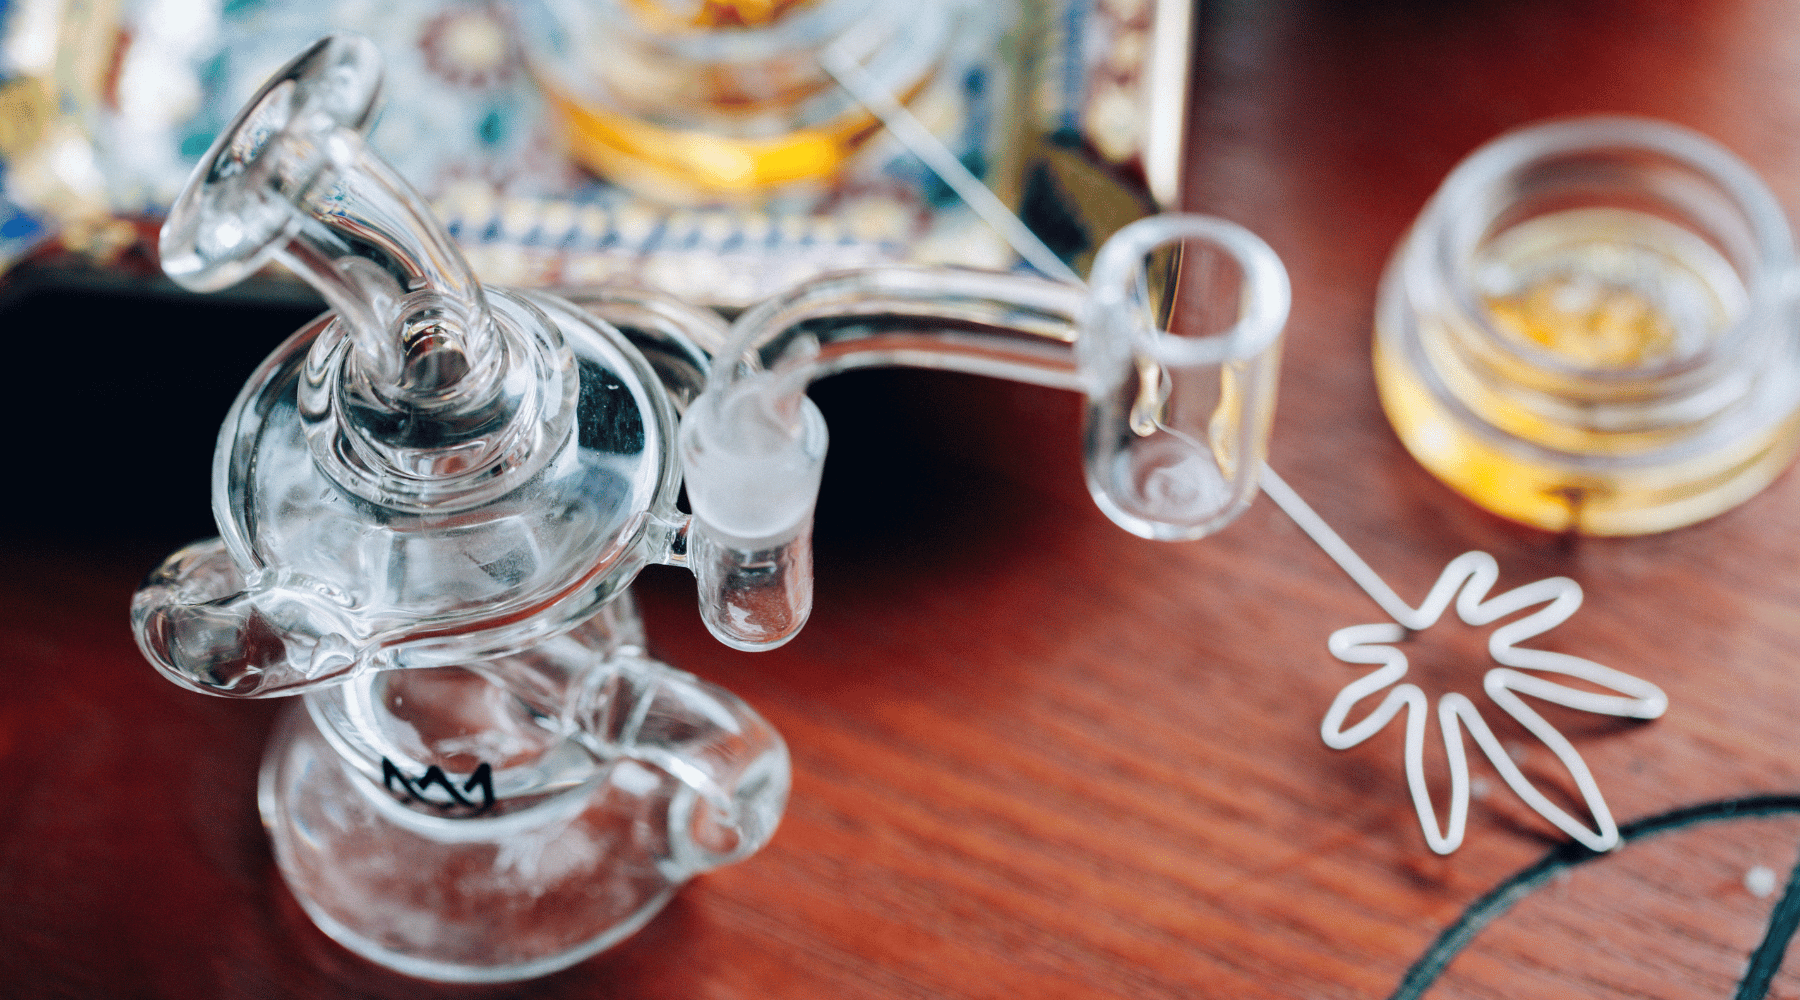 image showcasing what is a dab rig